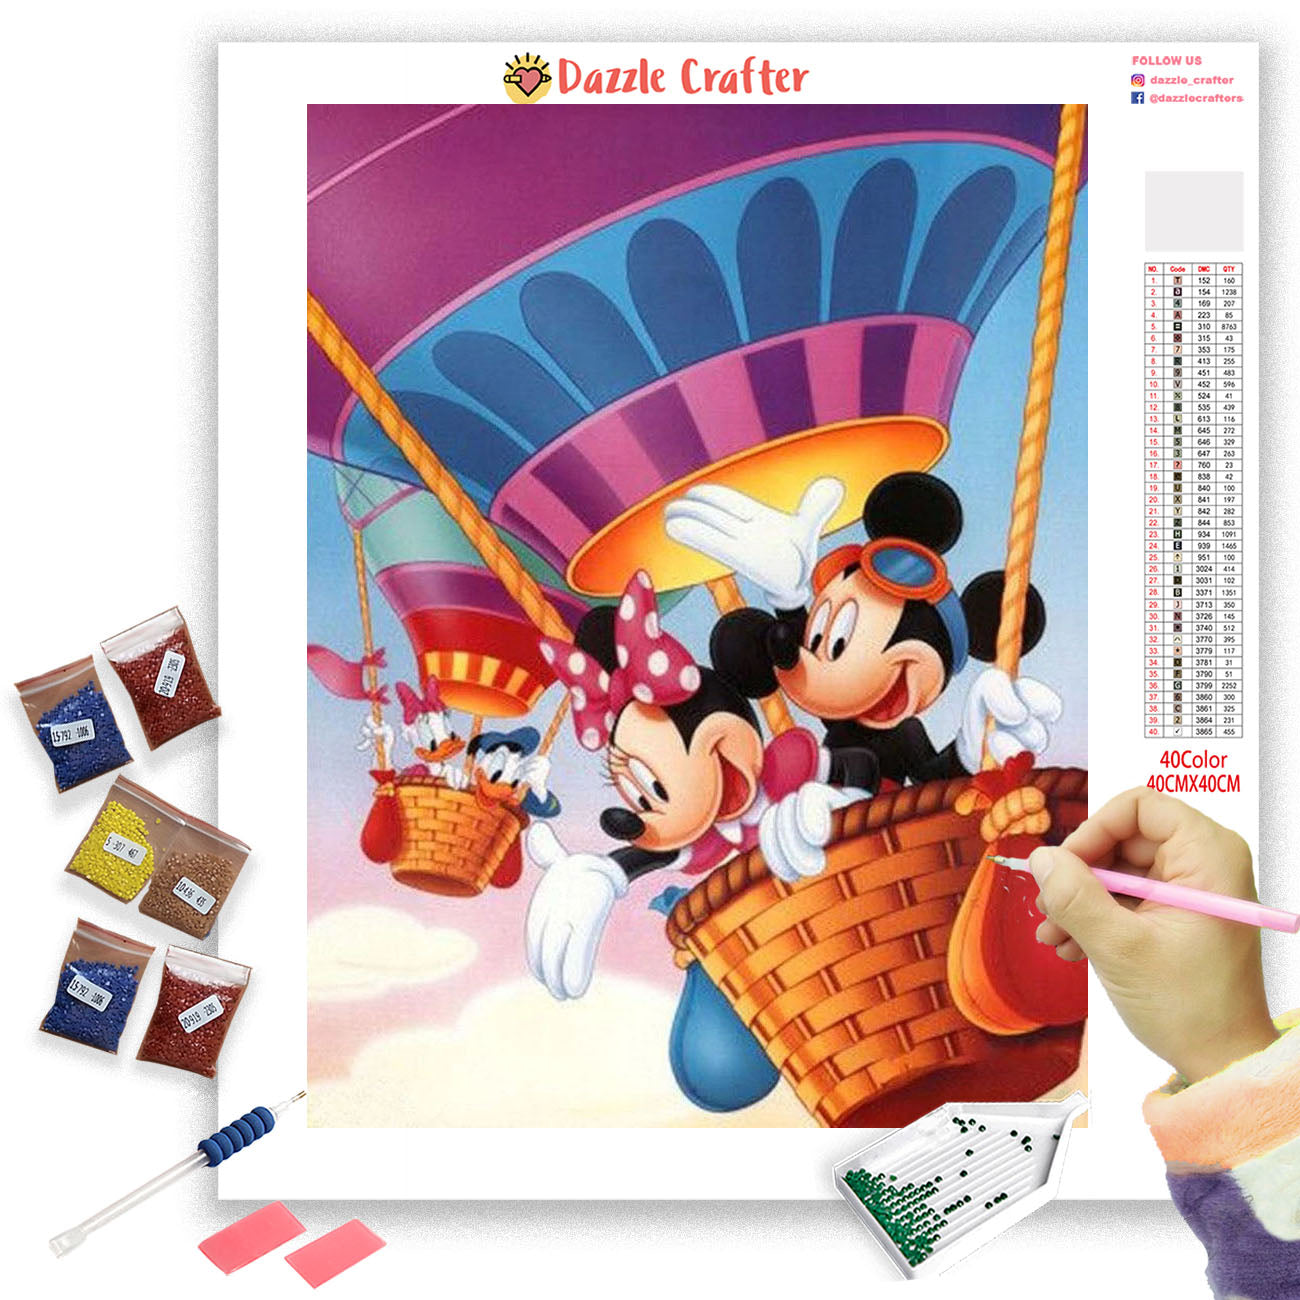 Fantasy Mickey and Friends Diamond Painting Kits for Adults 20